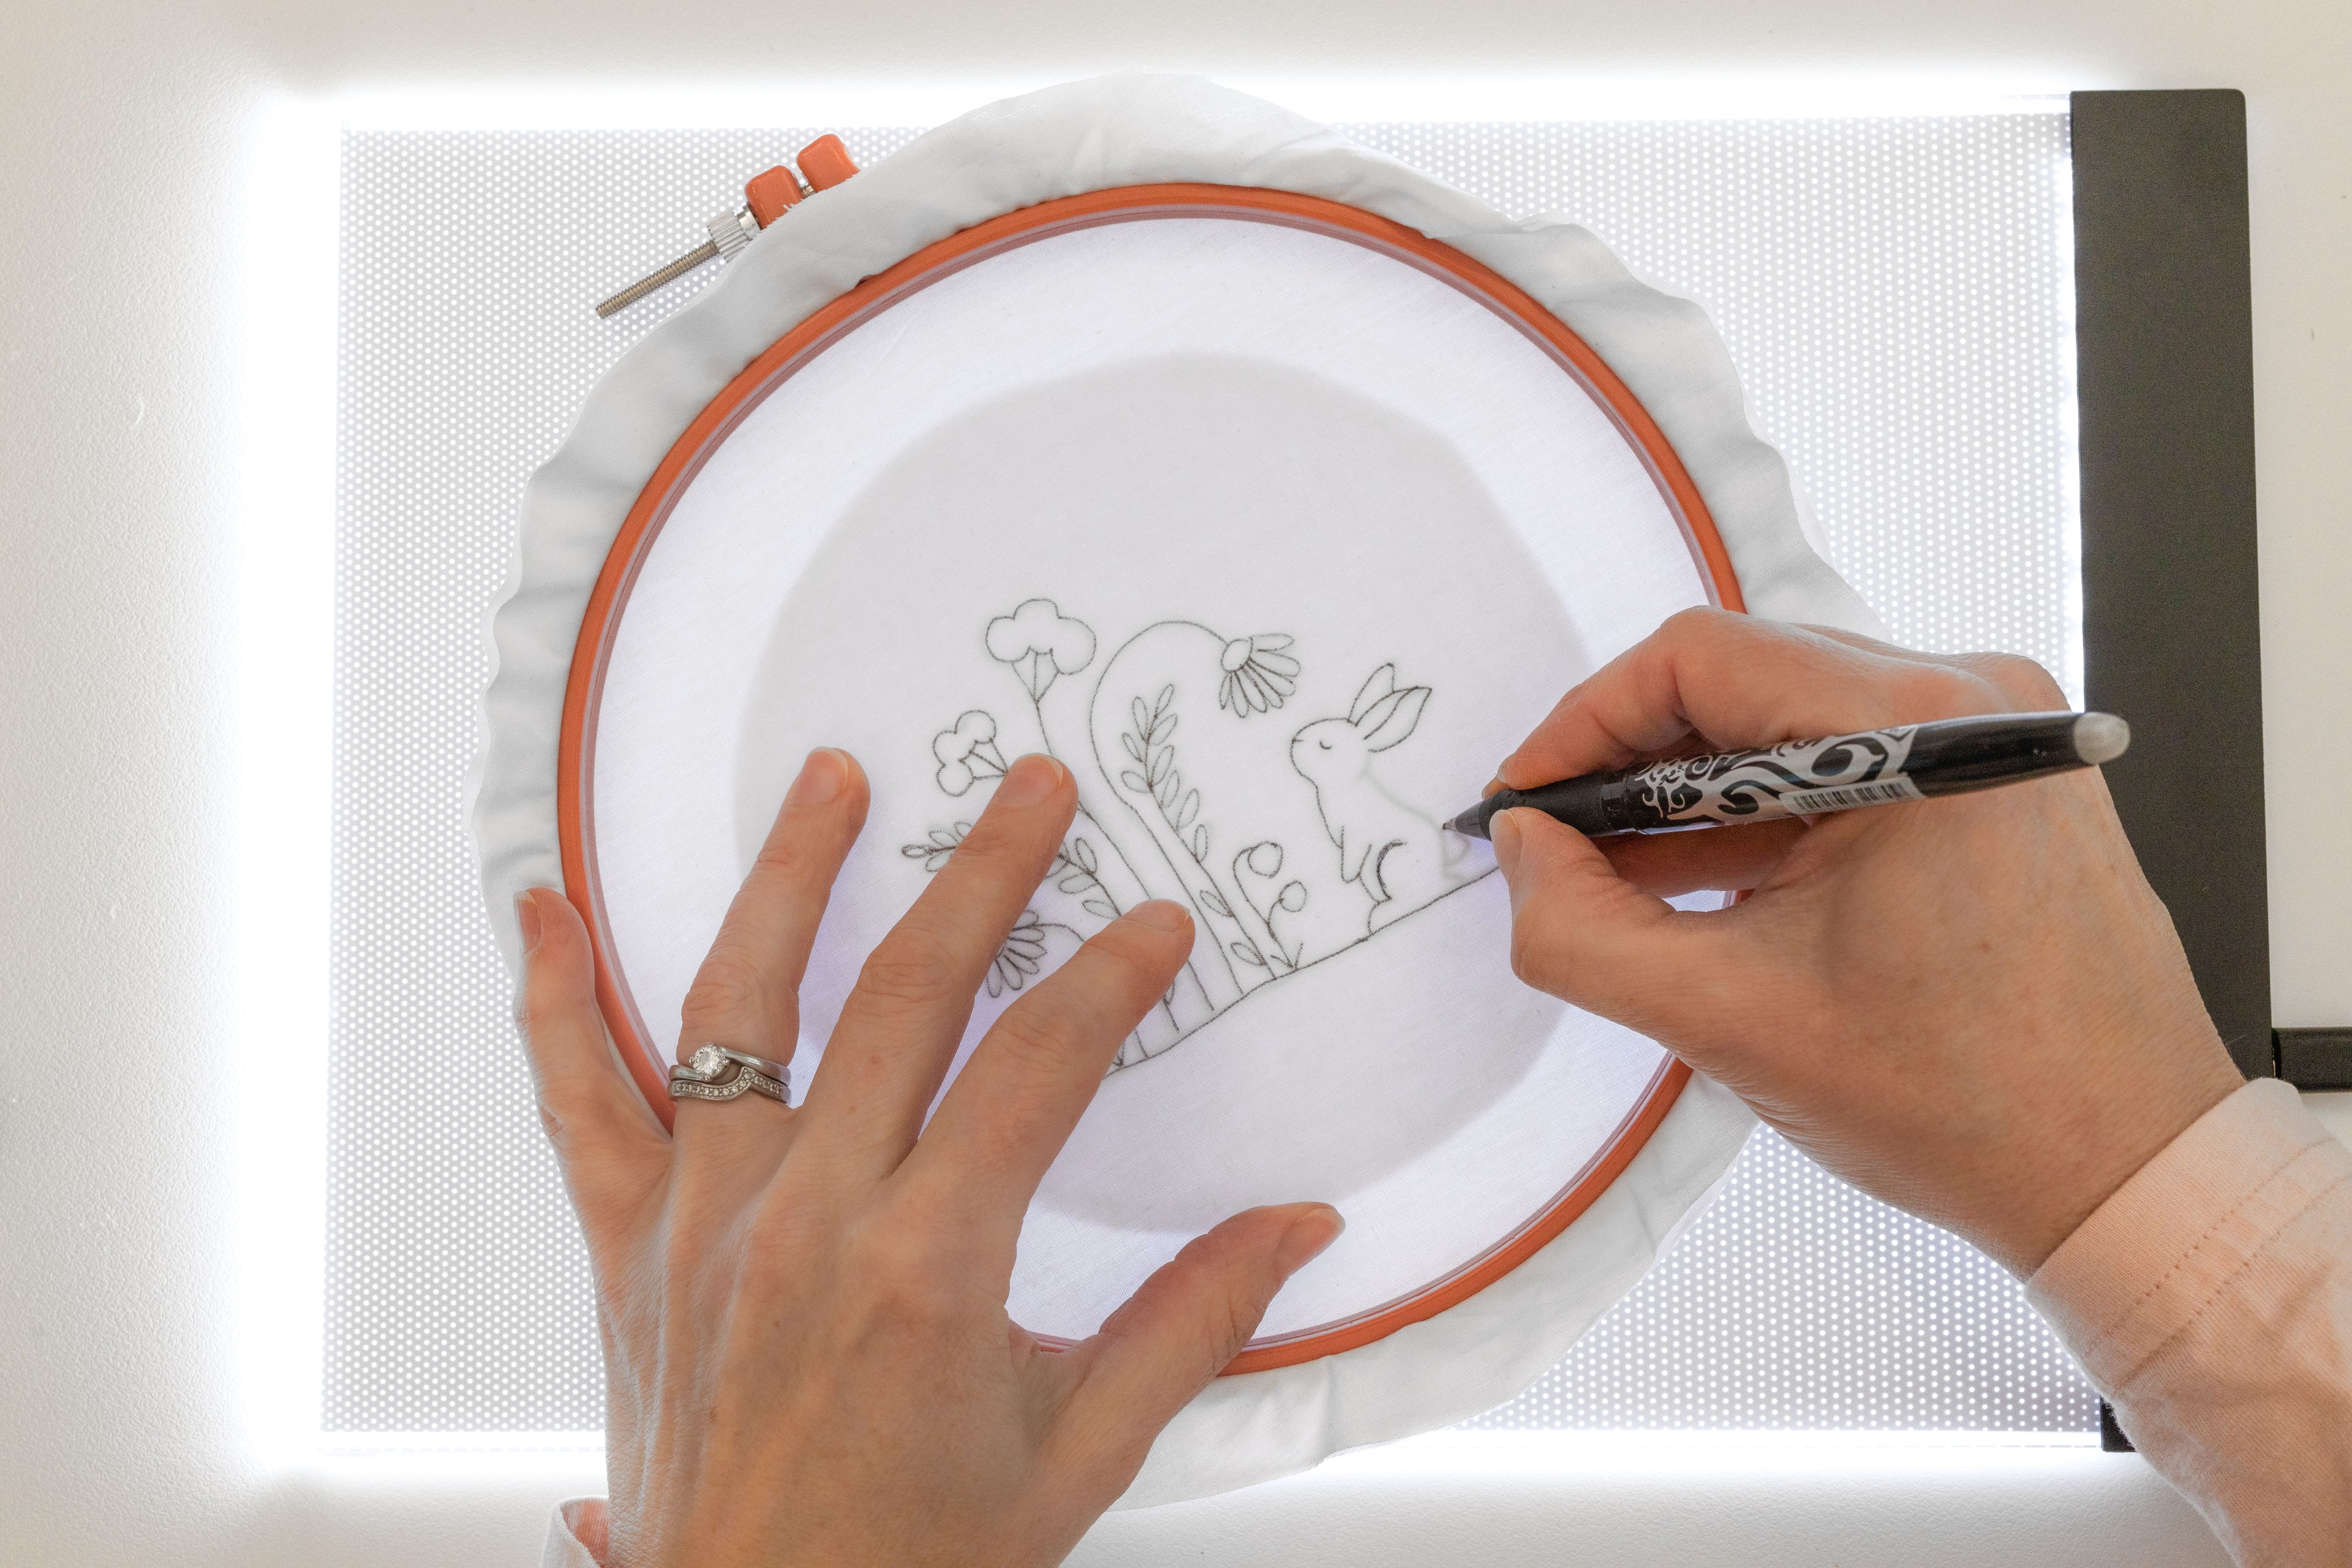 A hand draws a bunny on the fabric in a hoop using the lightbox as a backdrop.